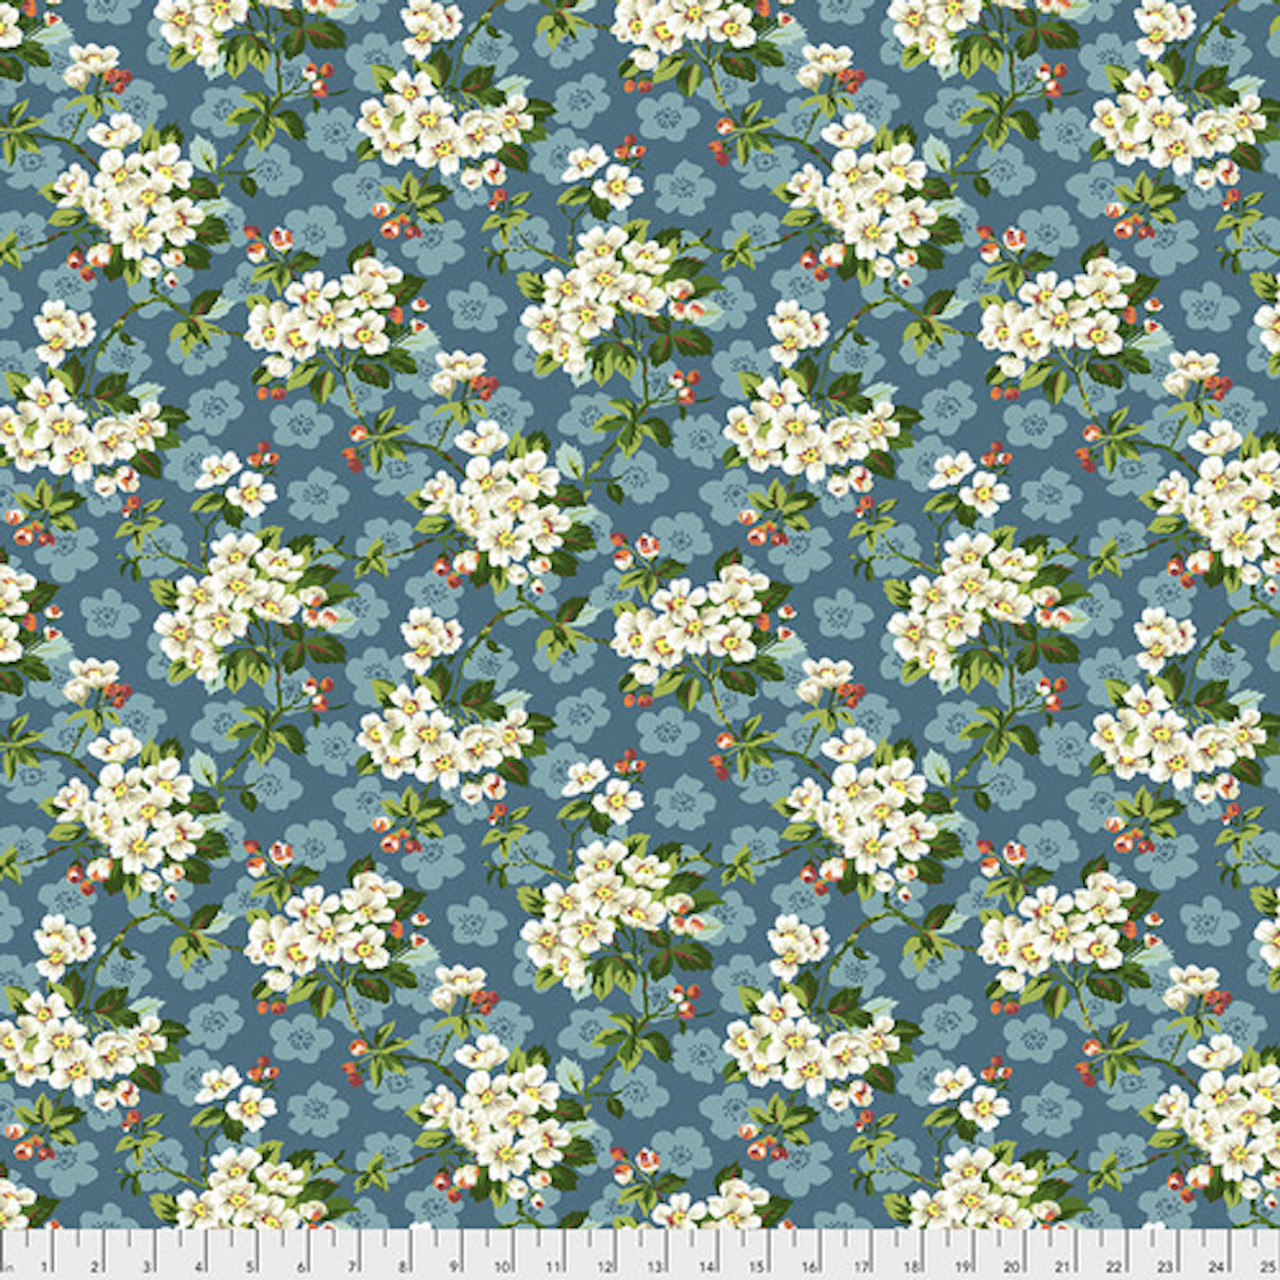 Snow Leopard PWSL075 Neddy's Meadow Spring Blossom Mint Cotton Fabric By The Yard